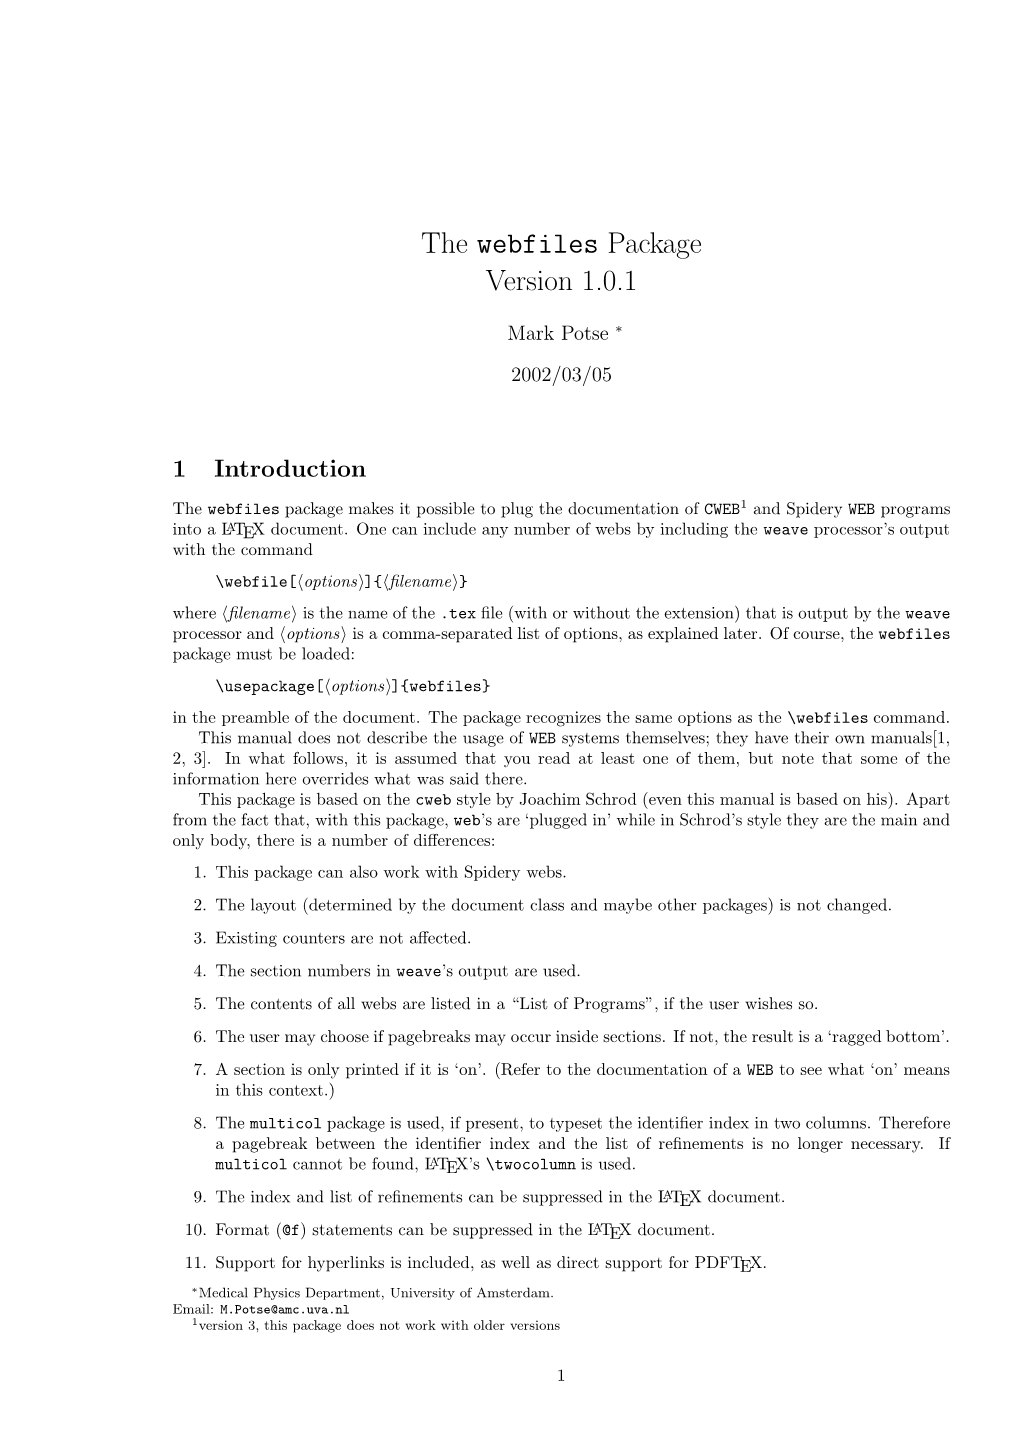 The Webfiles Package Version 1.0.1